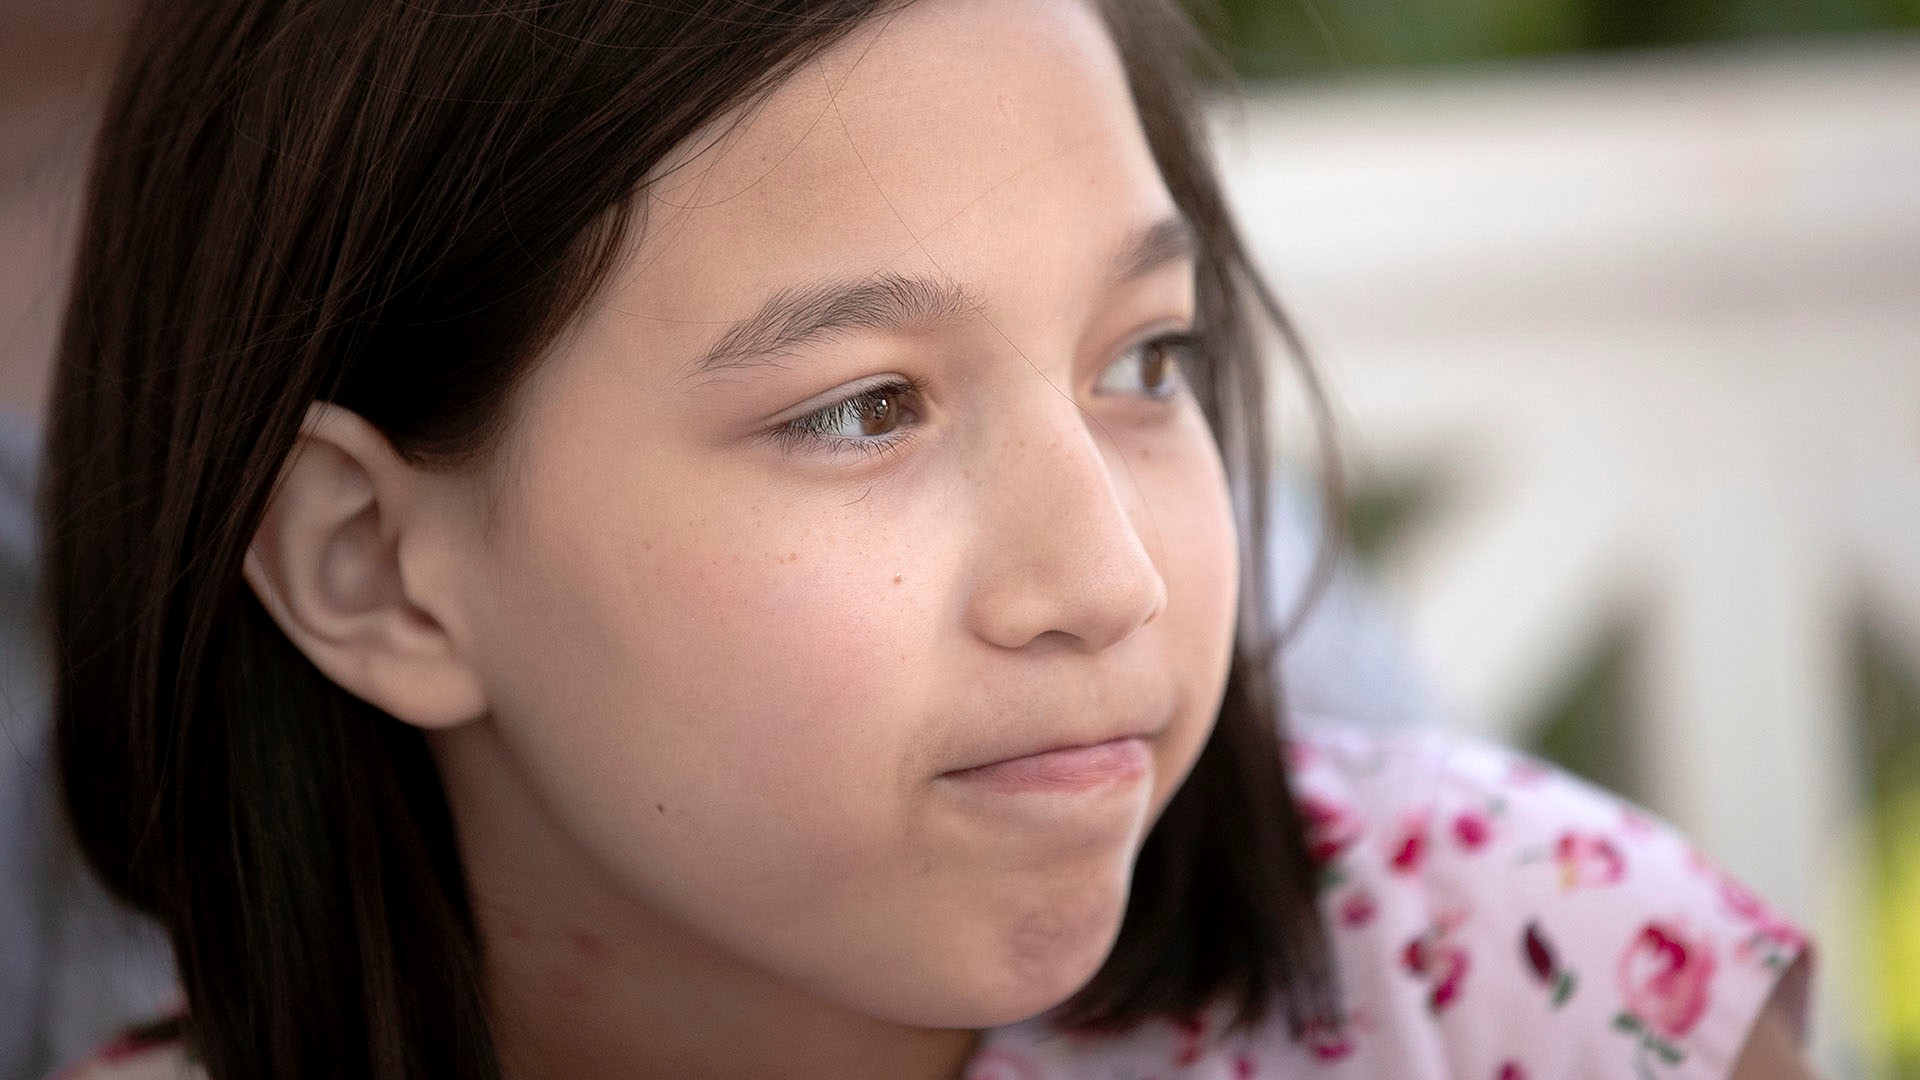 When 12-year-old Juliet Daly came down with a fever and severe abdominal pain lasting several days, her mother never expected it would be coronavirus.